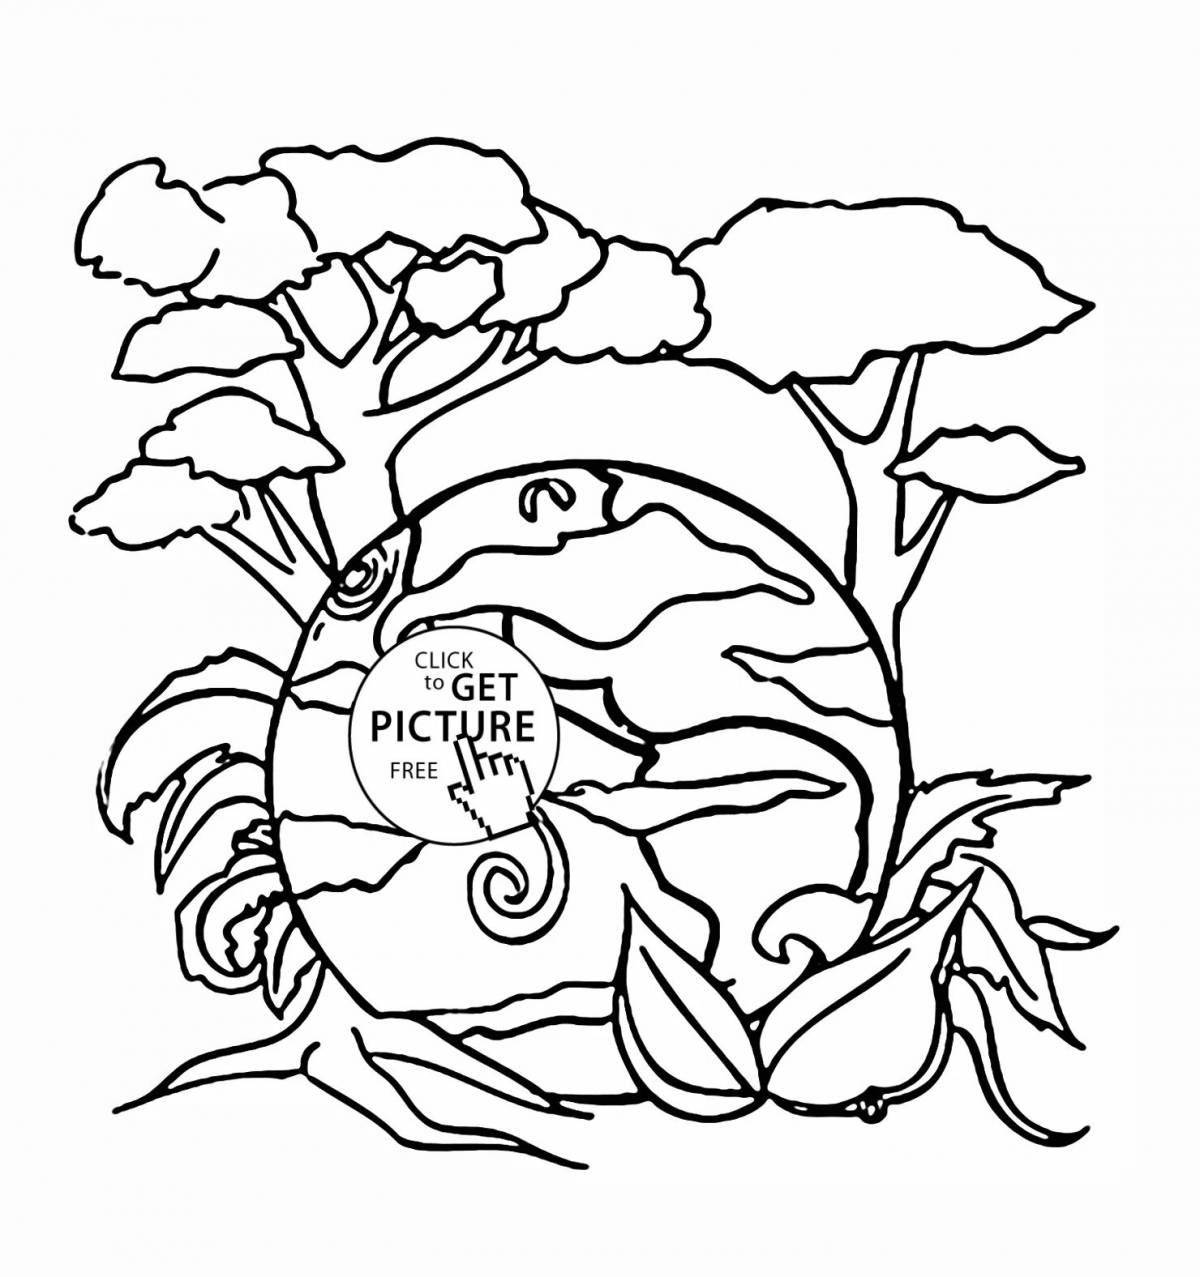 Large plant care coloring book